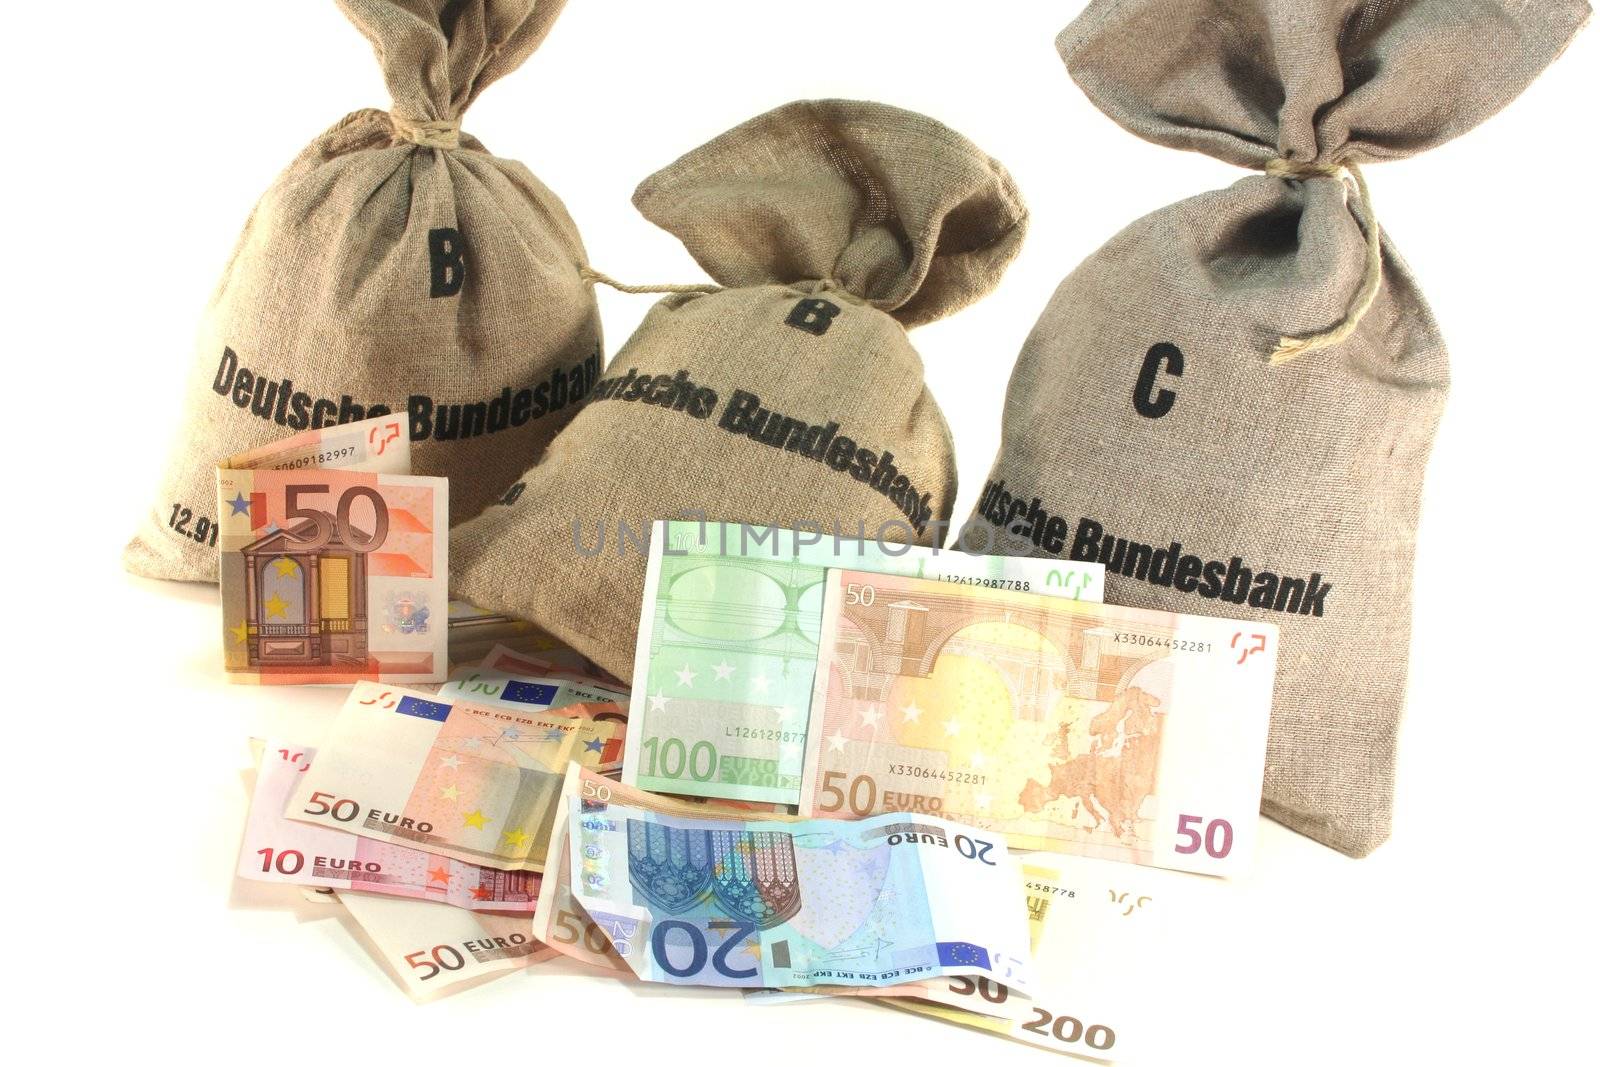 Federal Bank money bags with euro notes on a white background